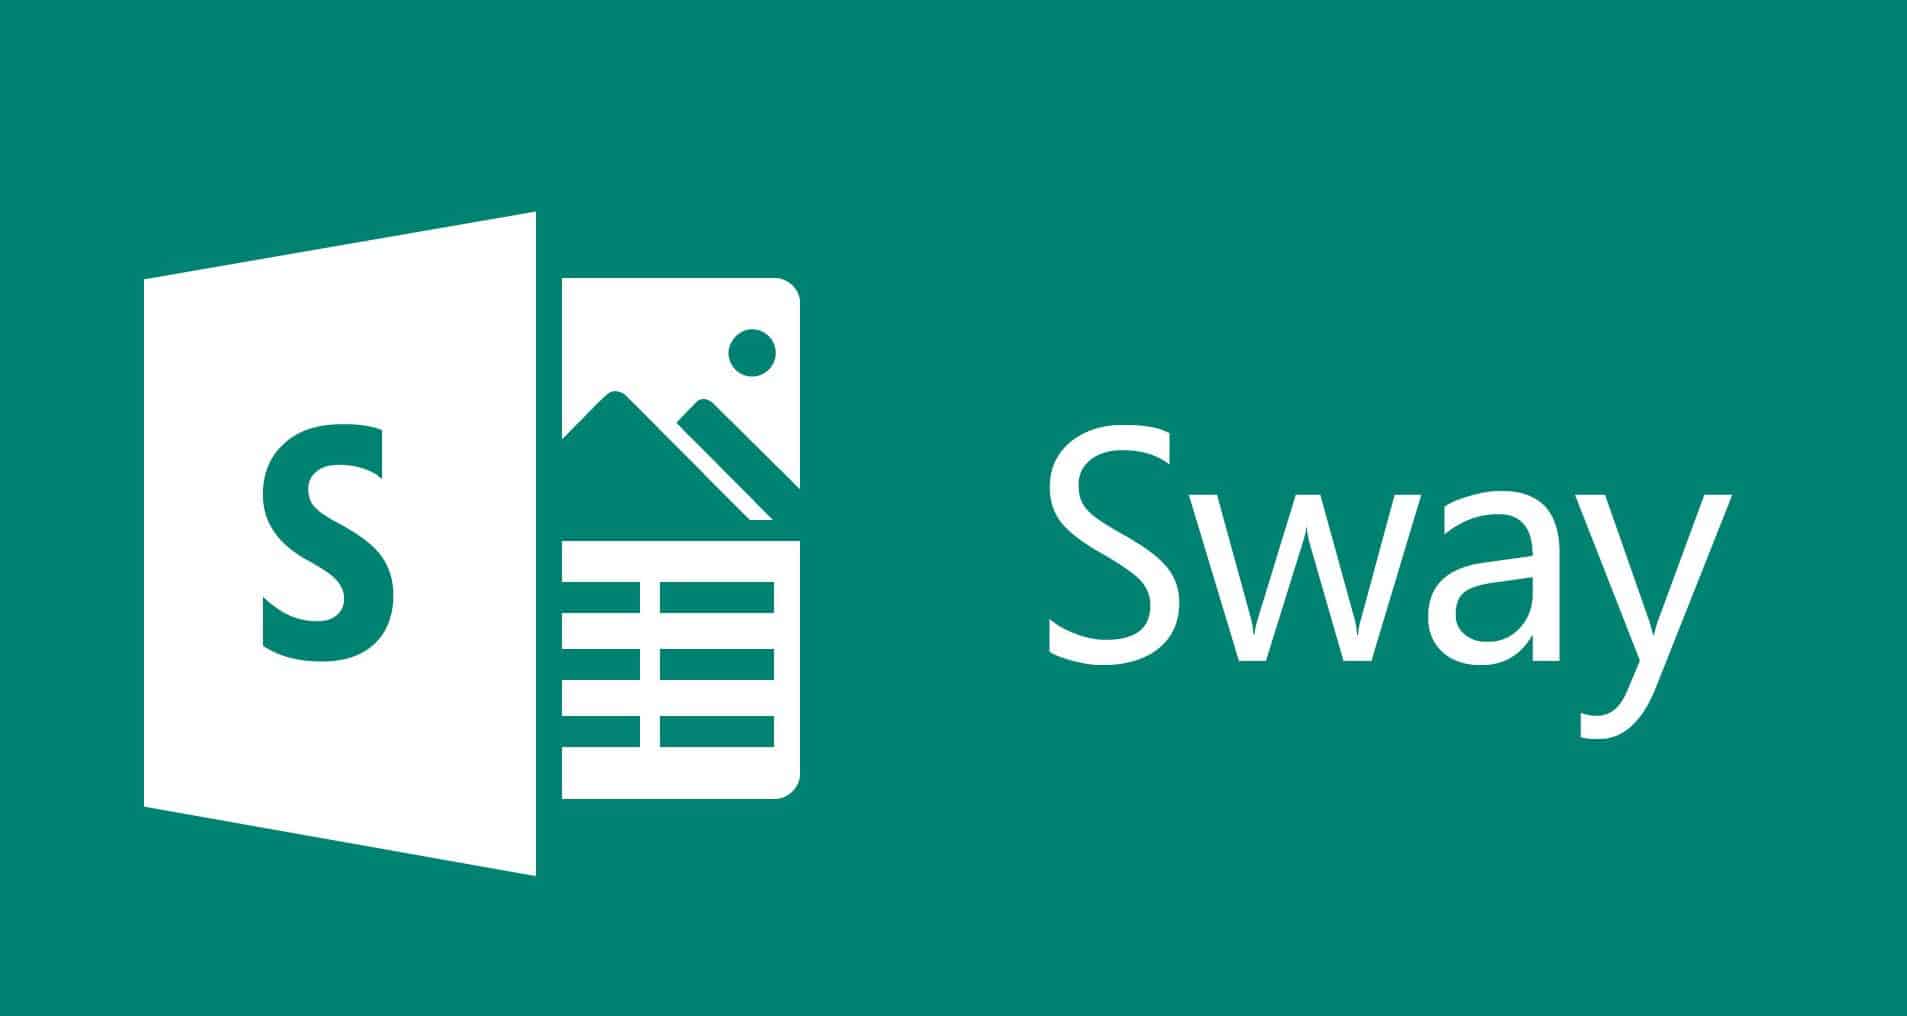 New-Features-Added-to-Sway-for-Office-365-Subscribers